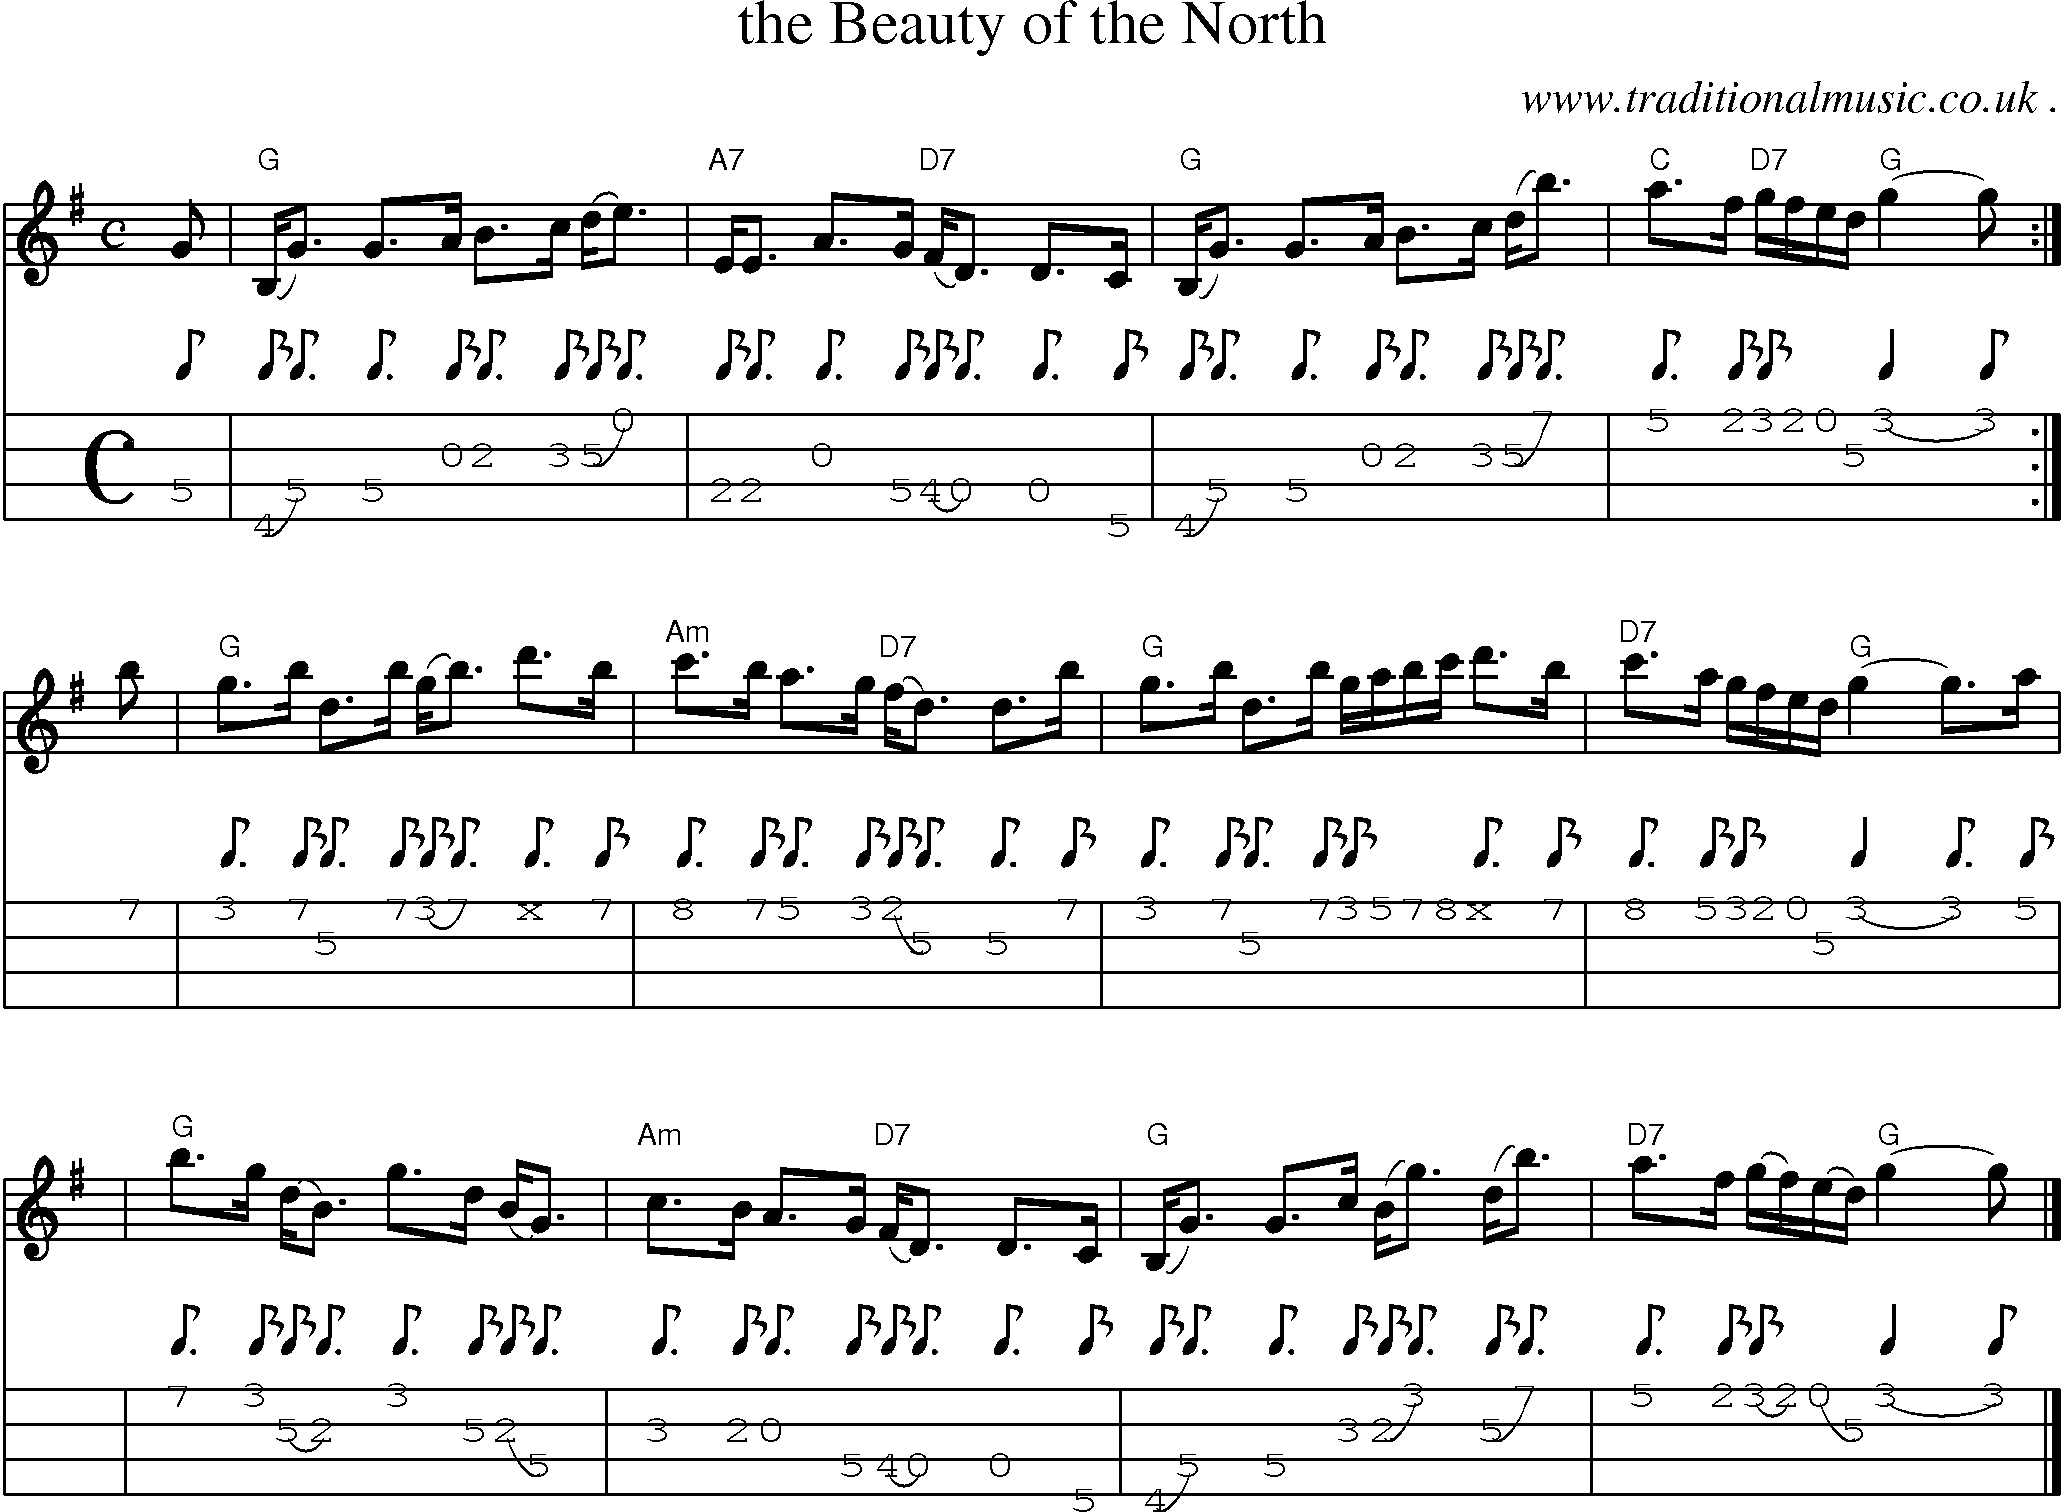 Sheet-music  score, Chords and Mandolin Tabs for The Beauty Of The North